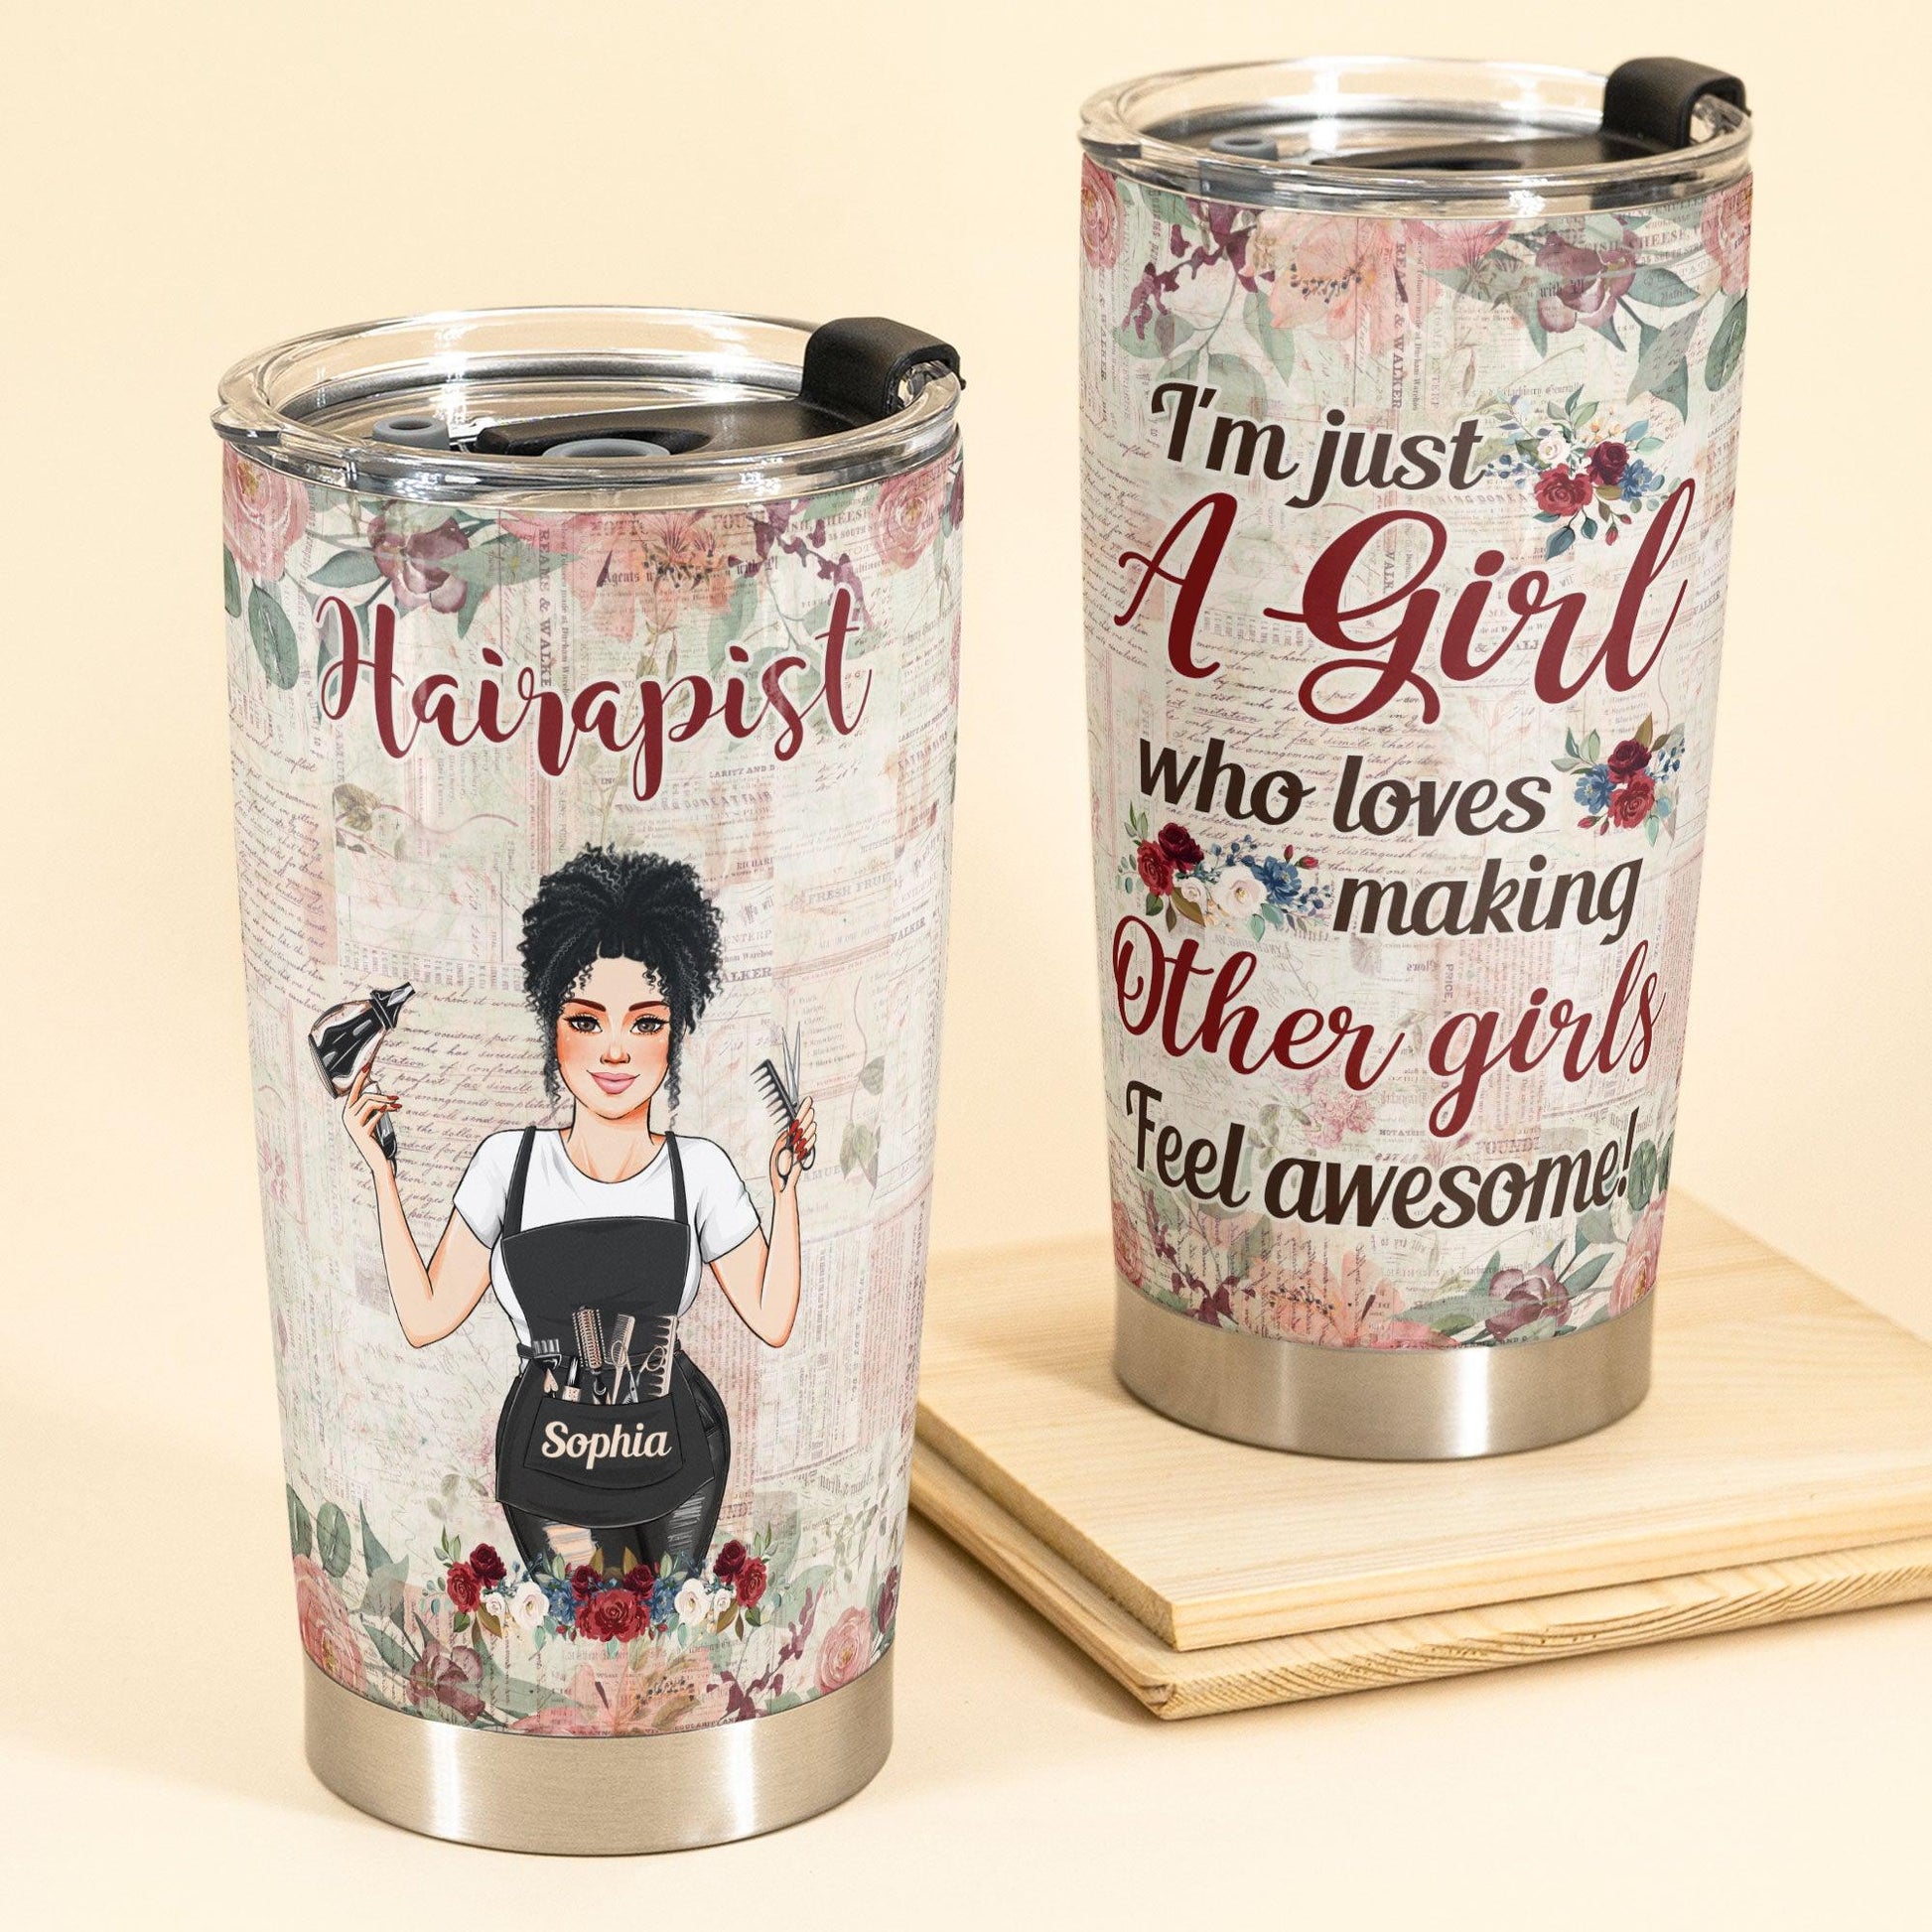 My Christmas Movie Cup - Personalized Mason Jar Cup With Straw – Macorner